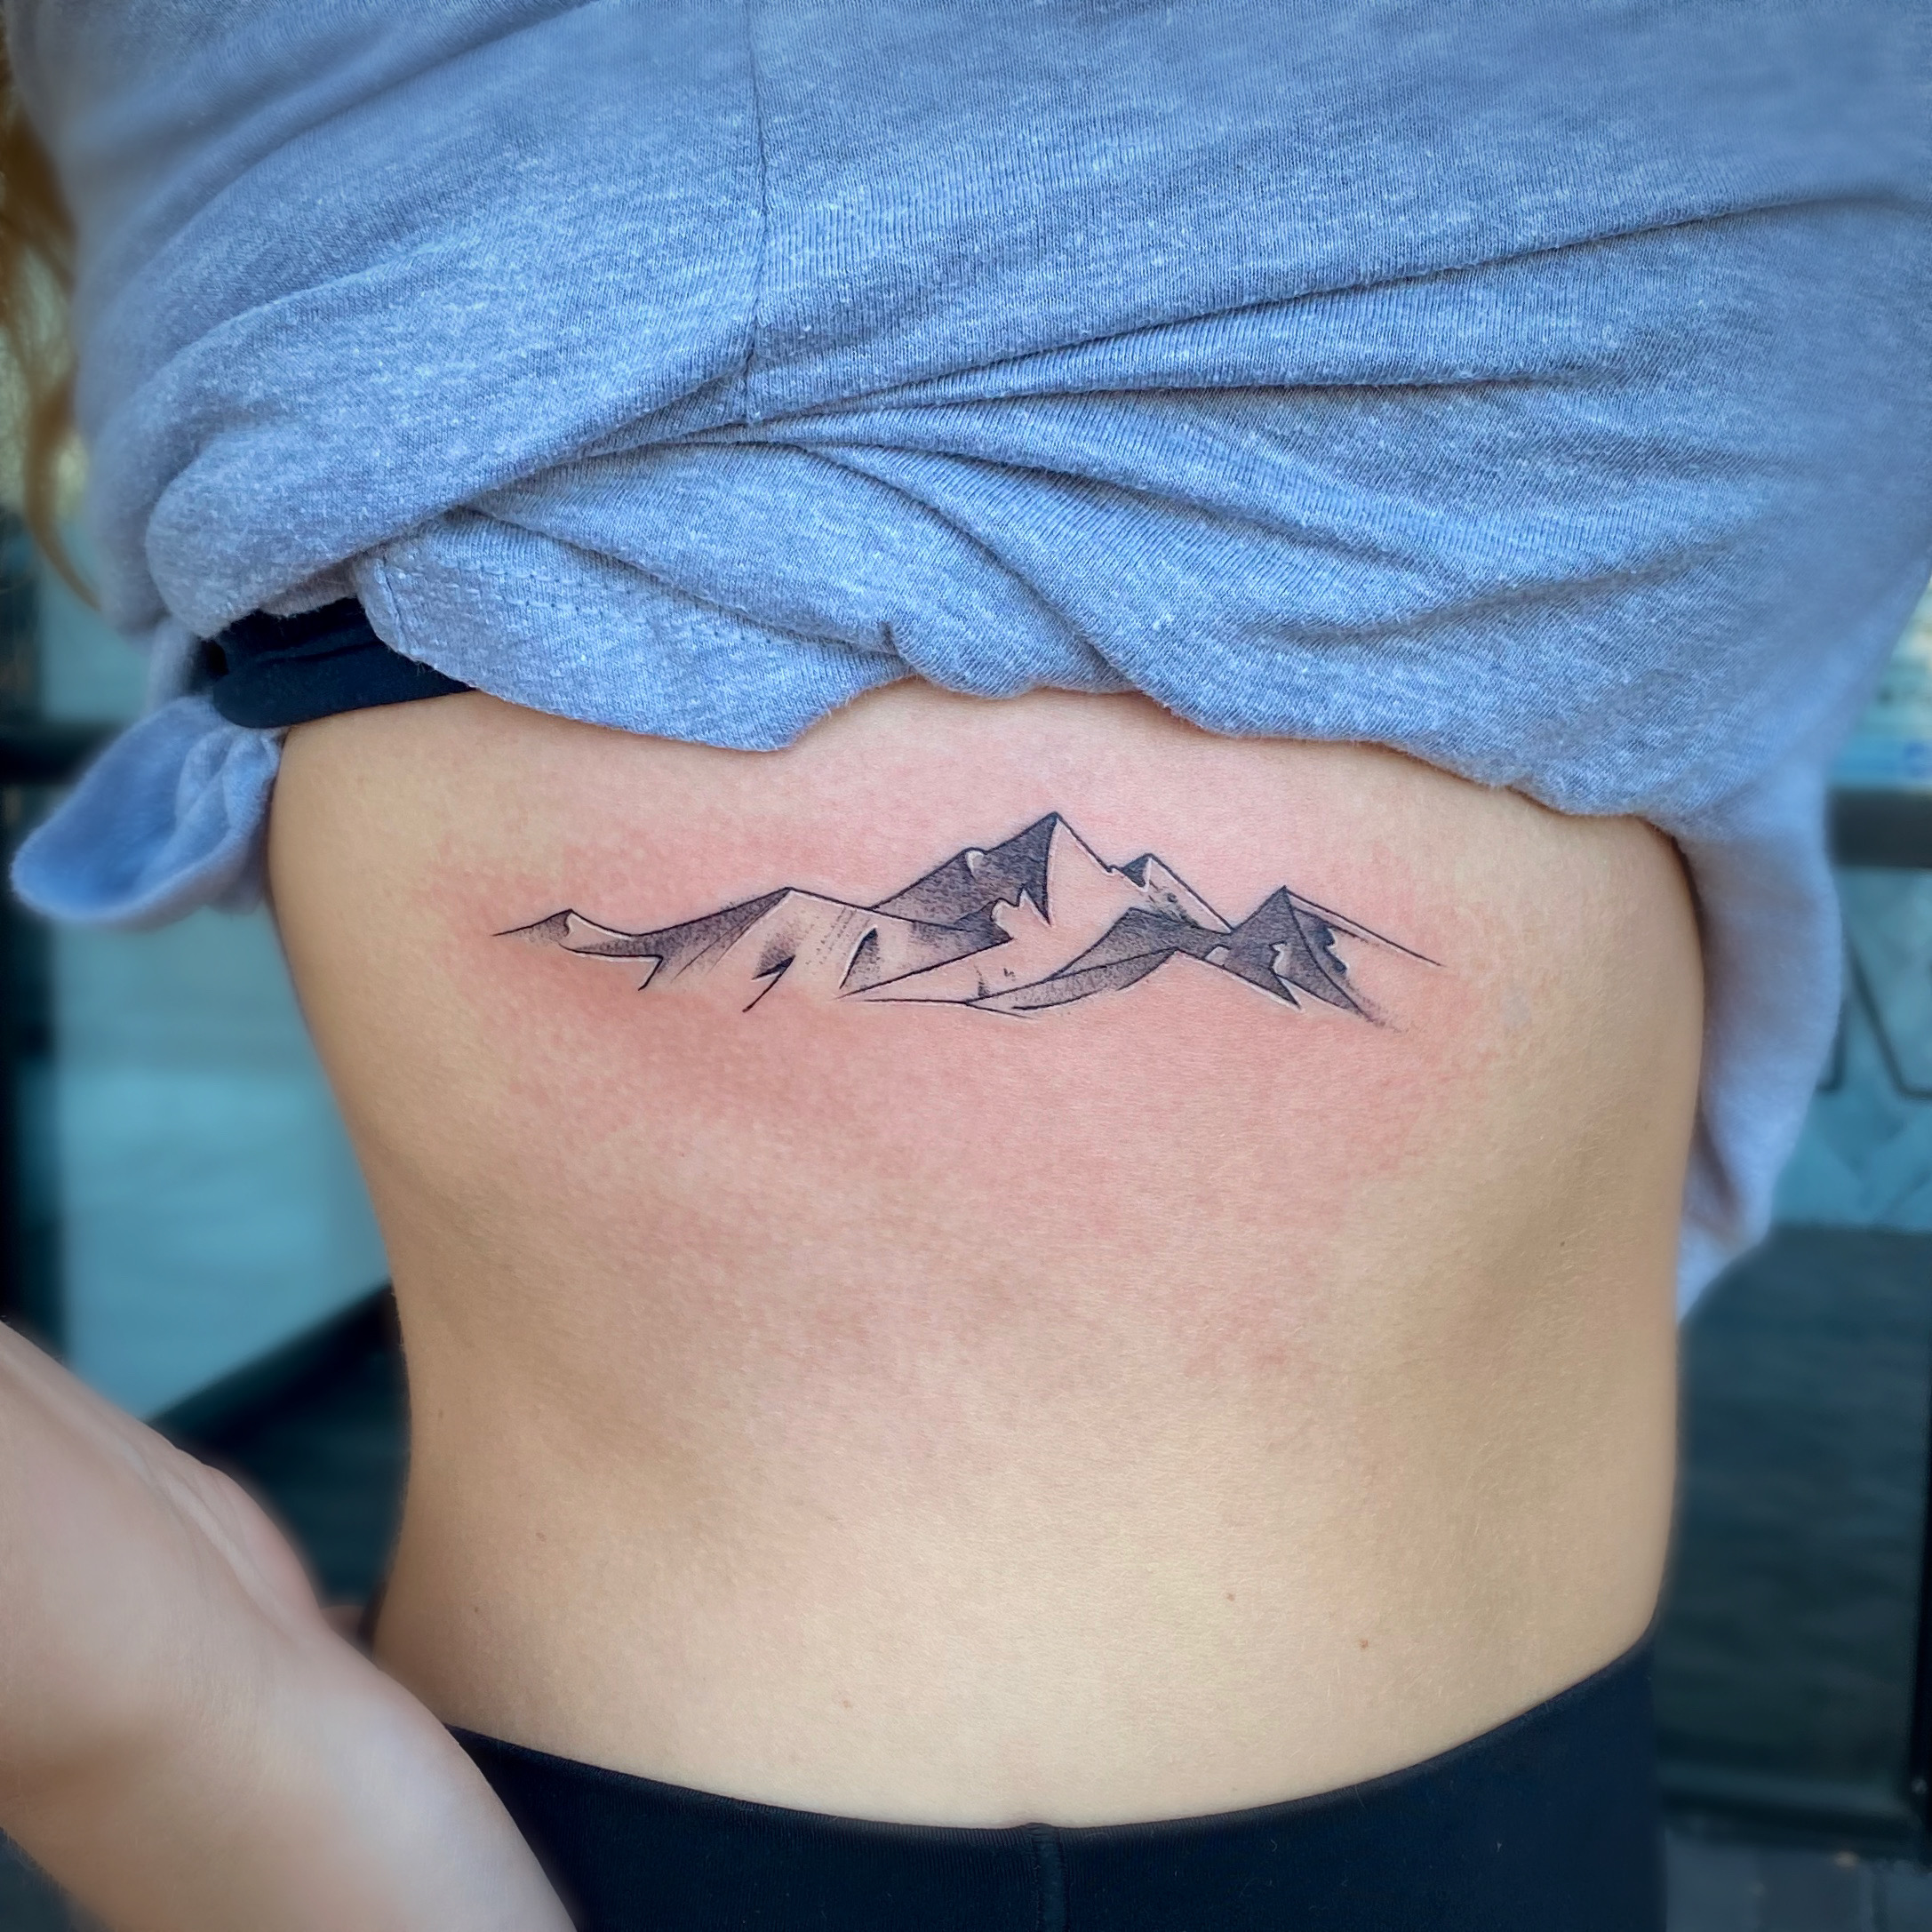 Bothells Hometown Tattoo  Recent custom tattoo by Mark Skin I love  designing PNW nature scenes like this especially with geometric elements  and dotwork Always down for more Freshly done swollen 